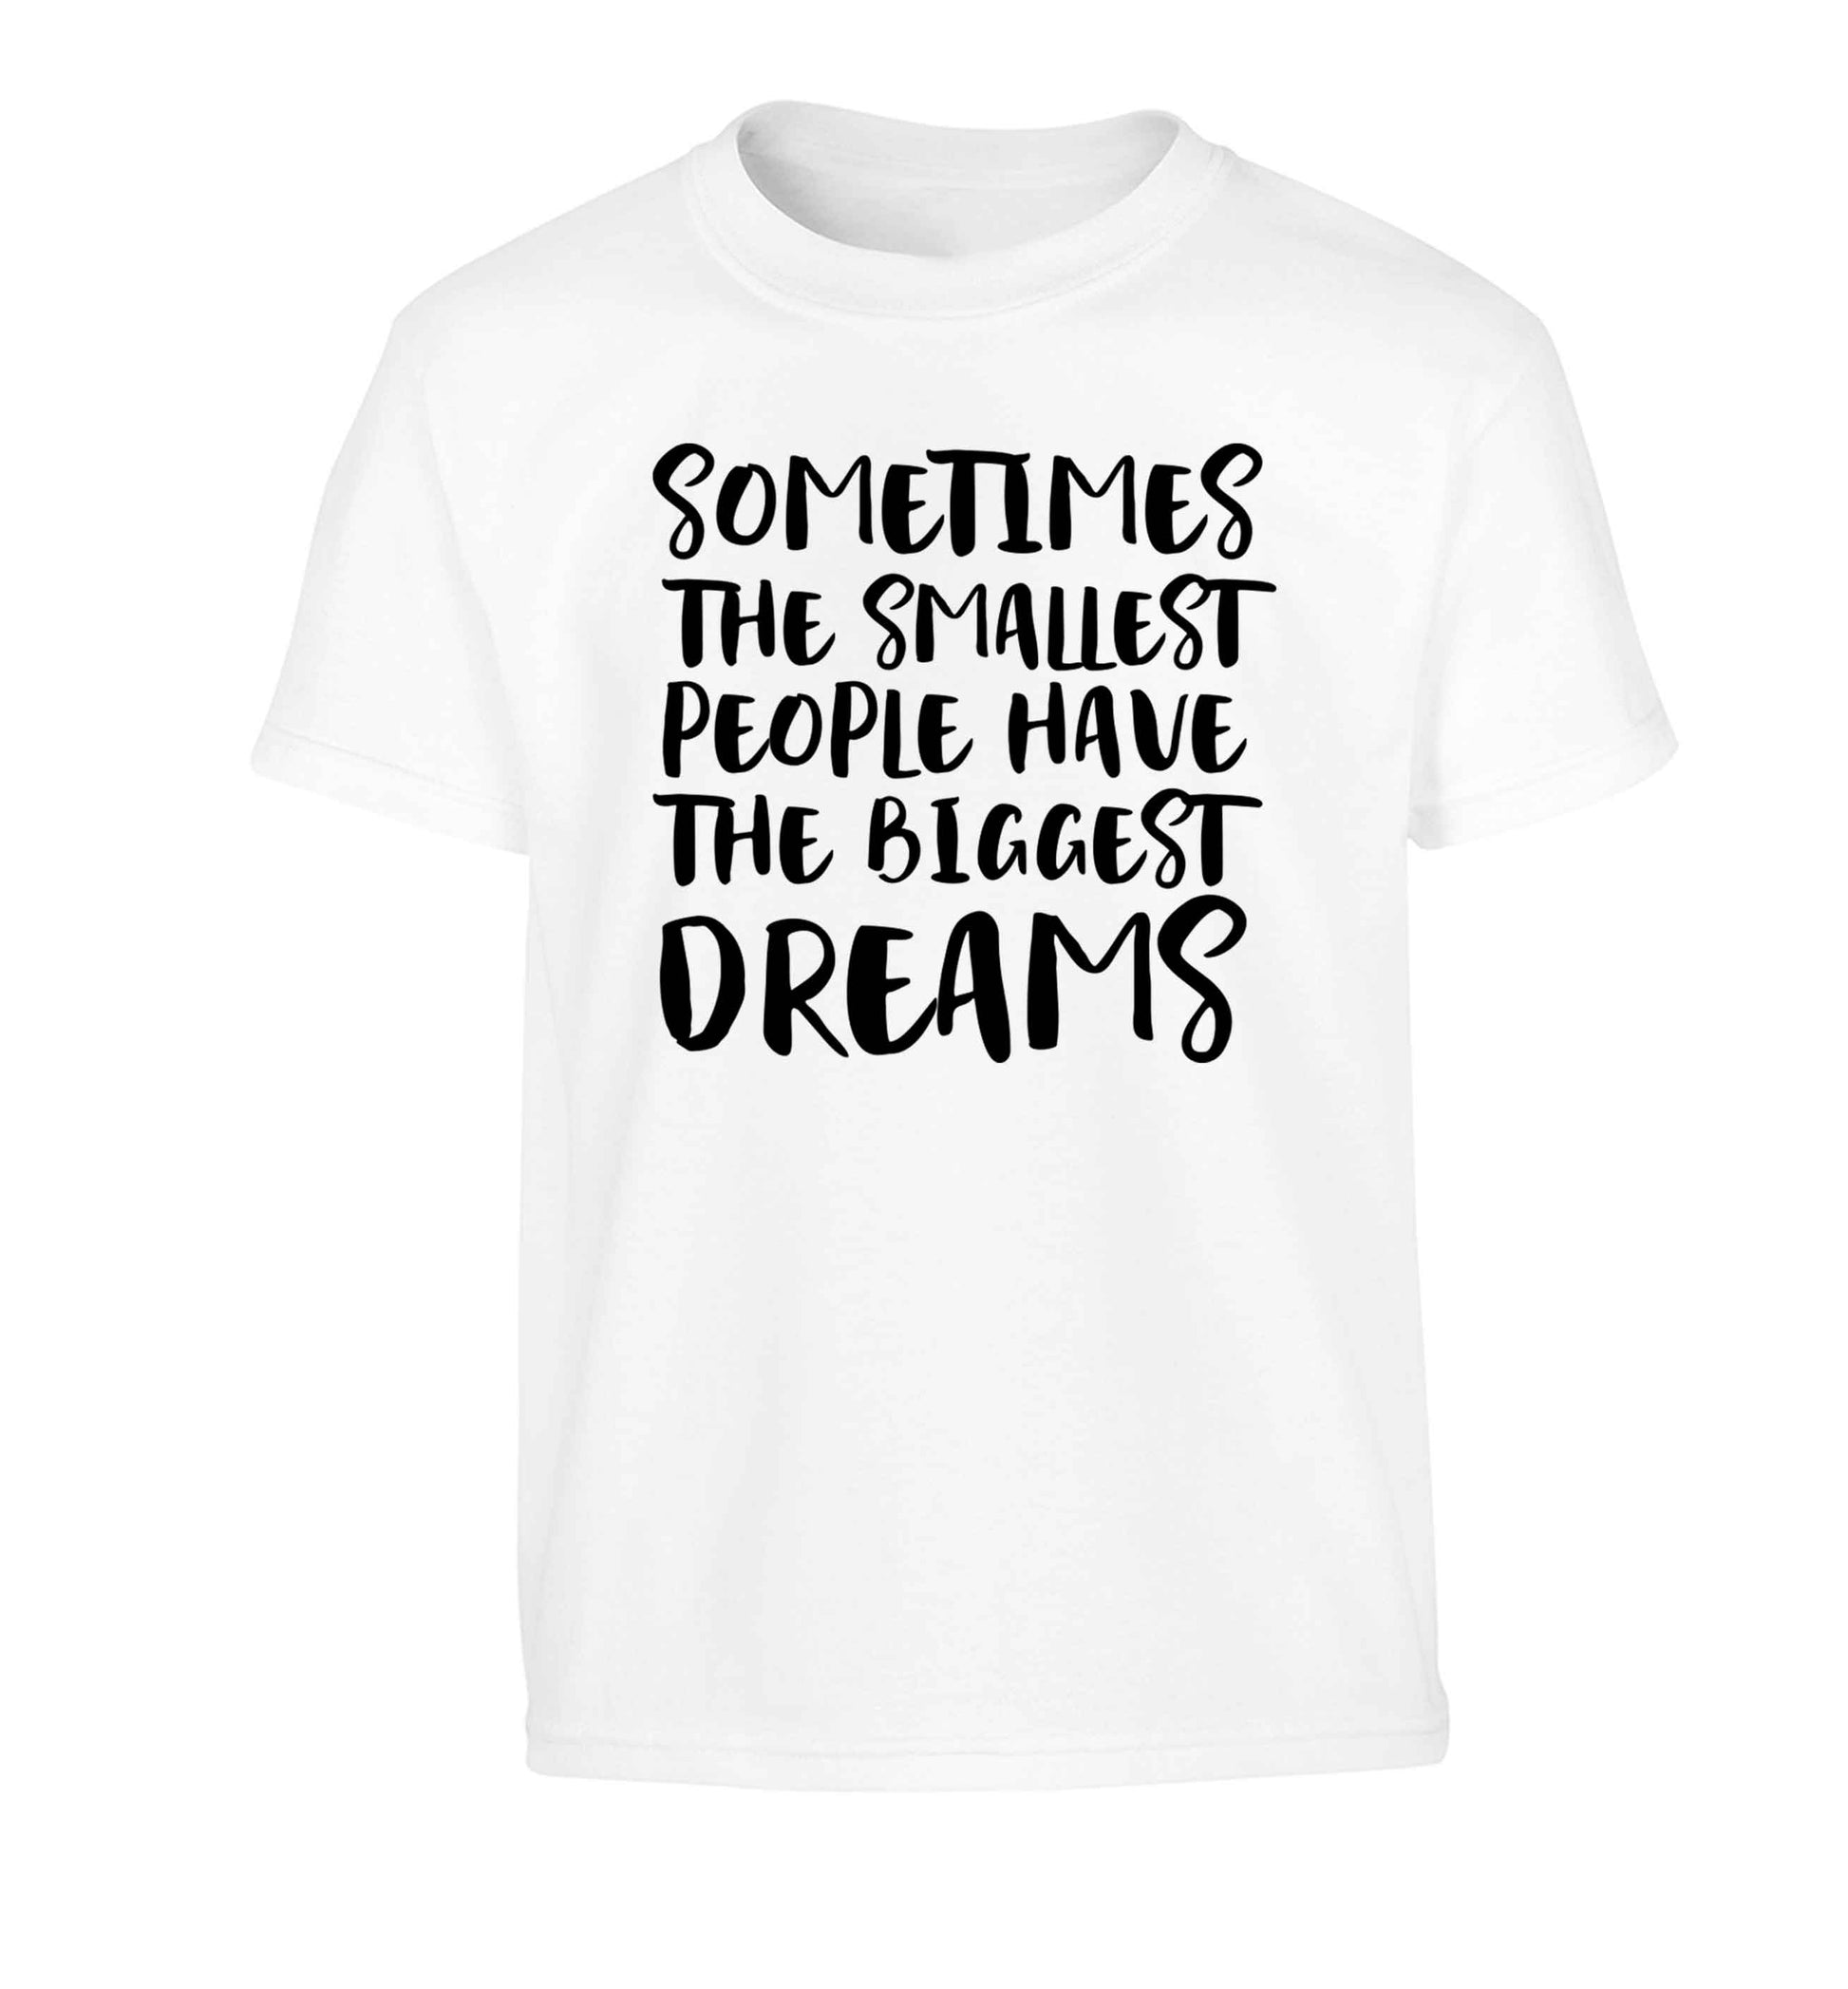 Sometimes the smallest people have the biggest dreams Children's white Tshirt 12-13 Years